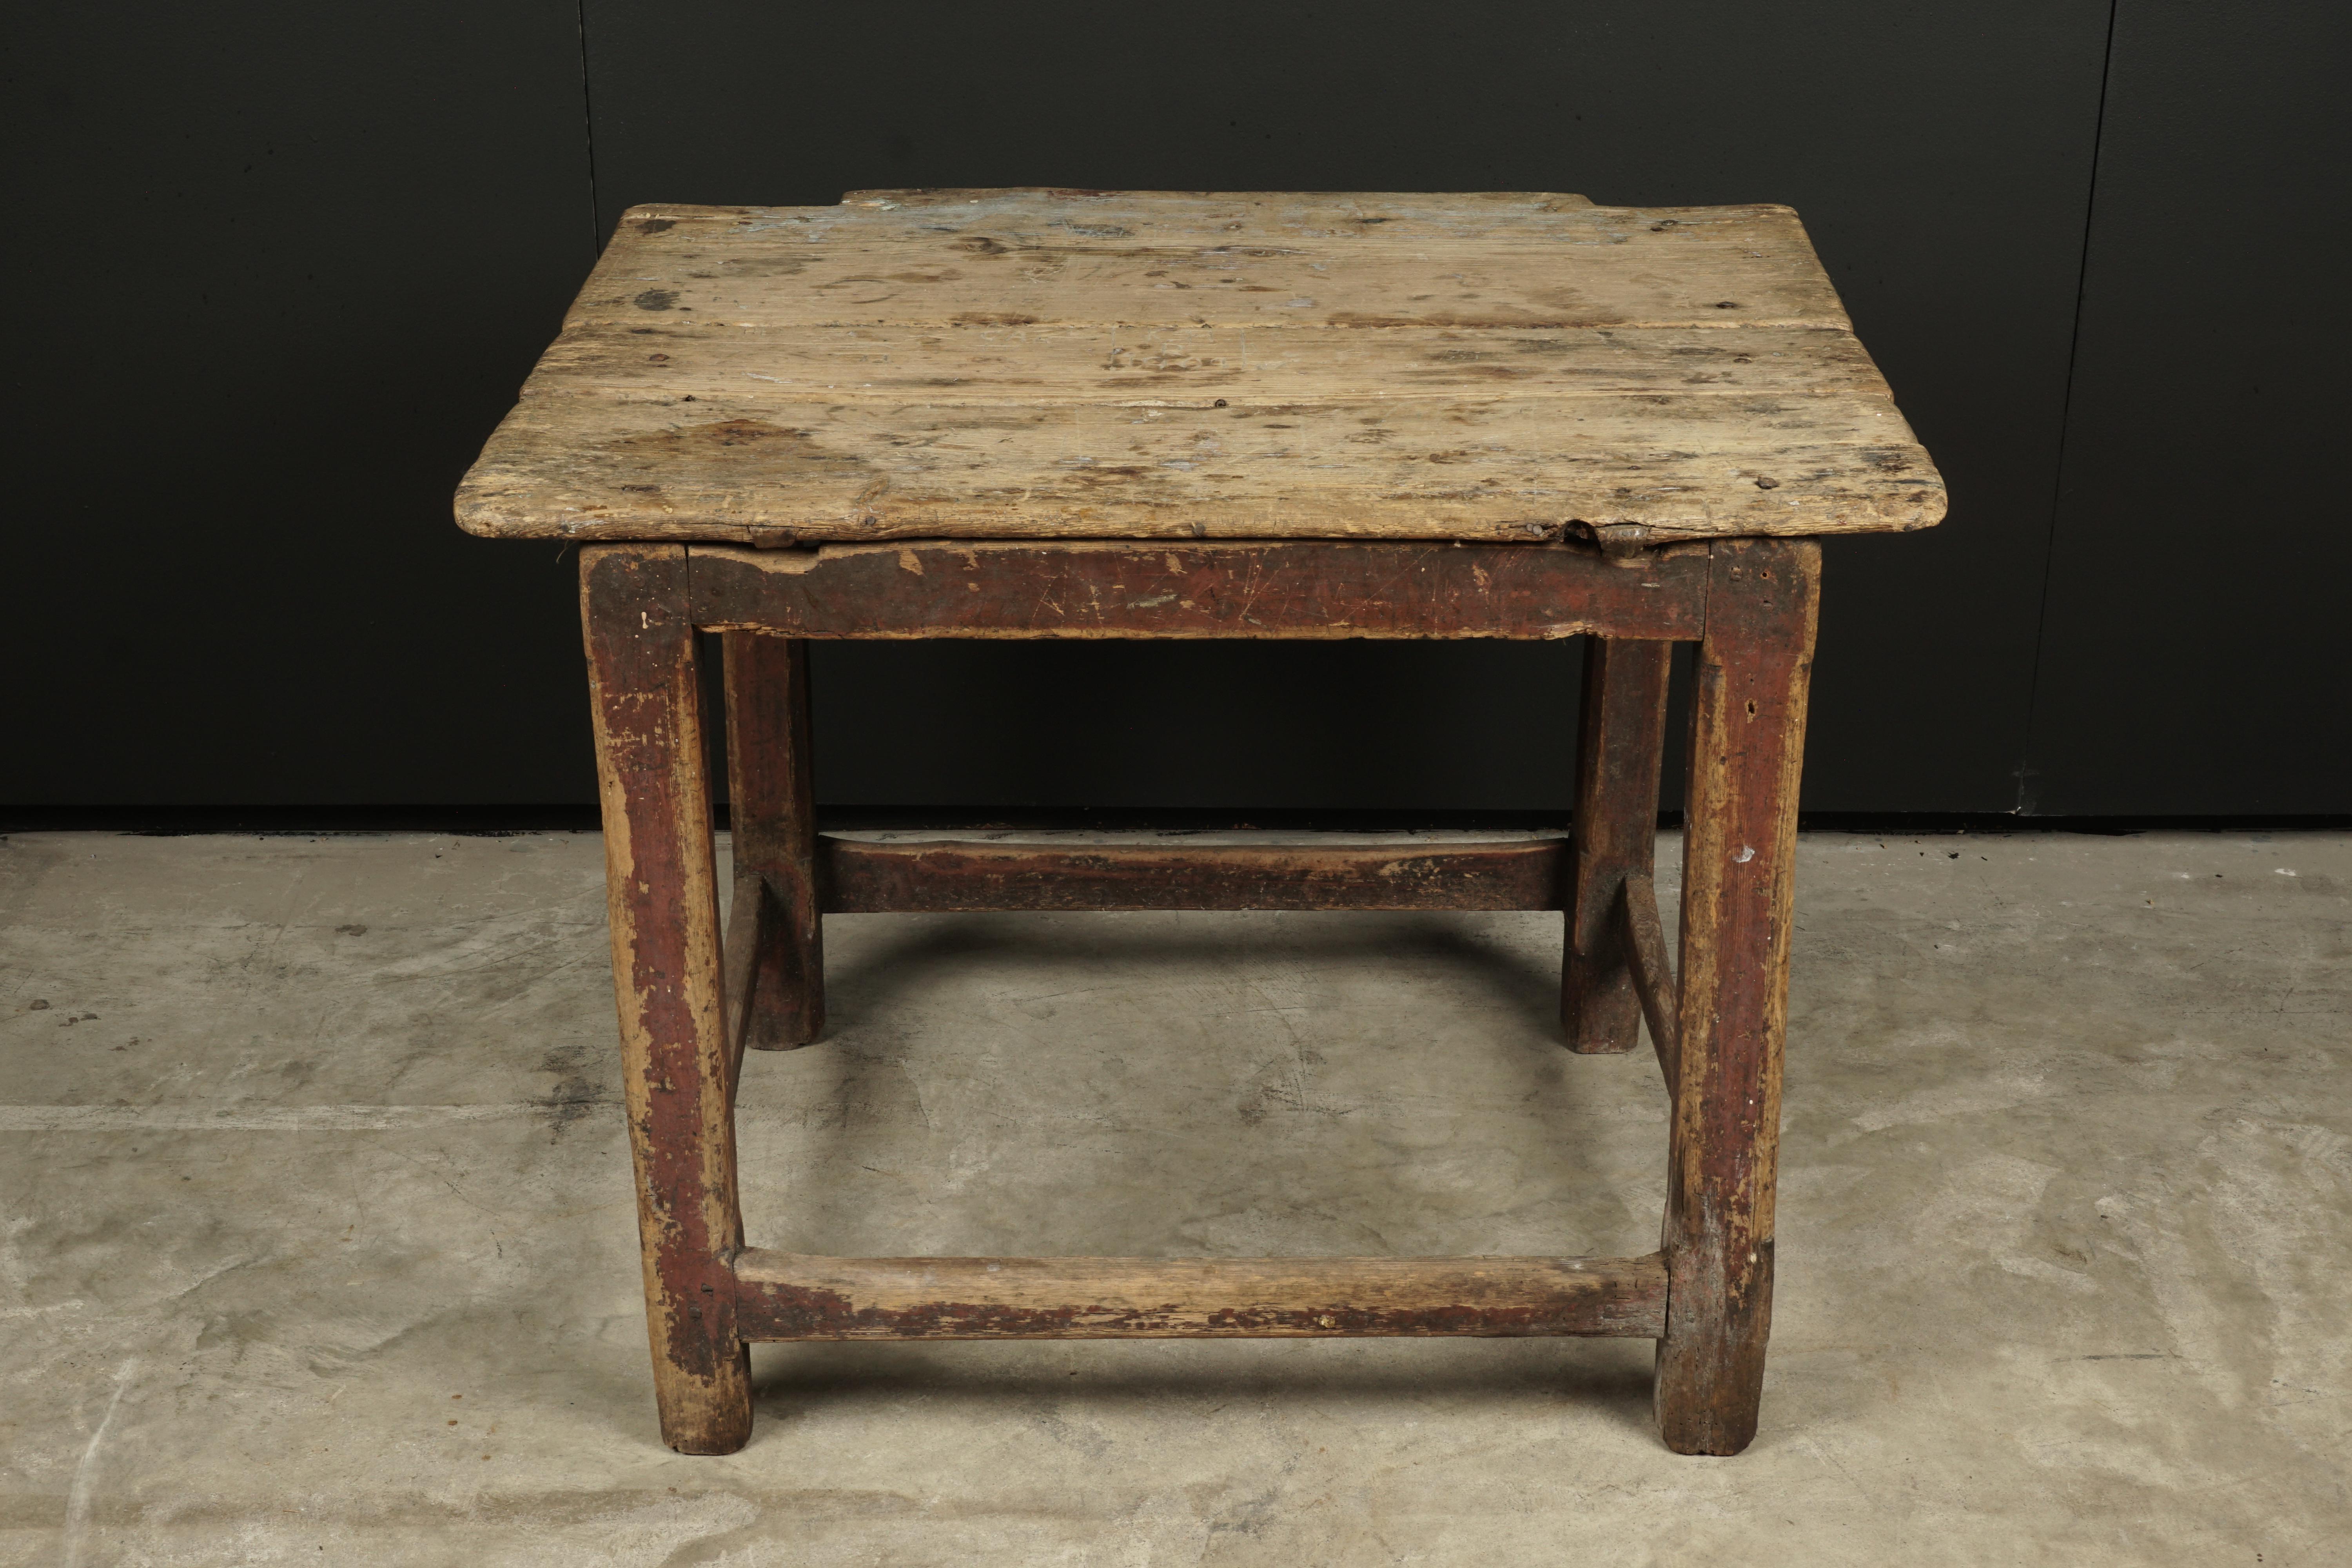 Early Primitive table from Sweden, circa 1850. Solid pine construction with great original color and patina. Top with nice graffiti.